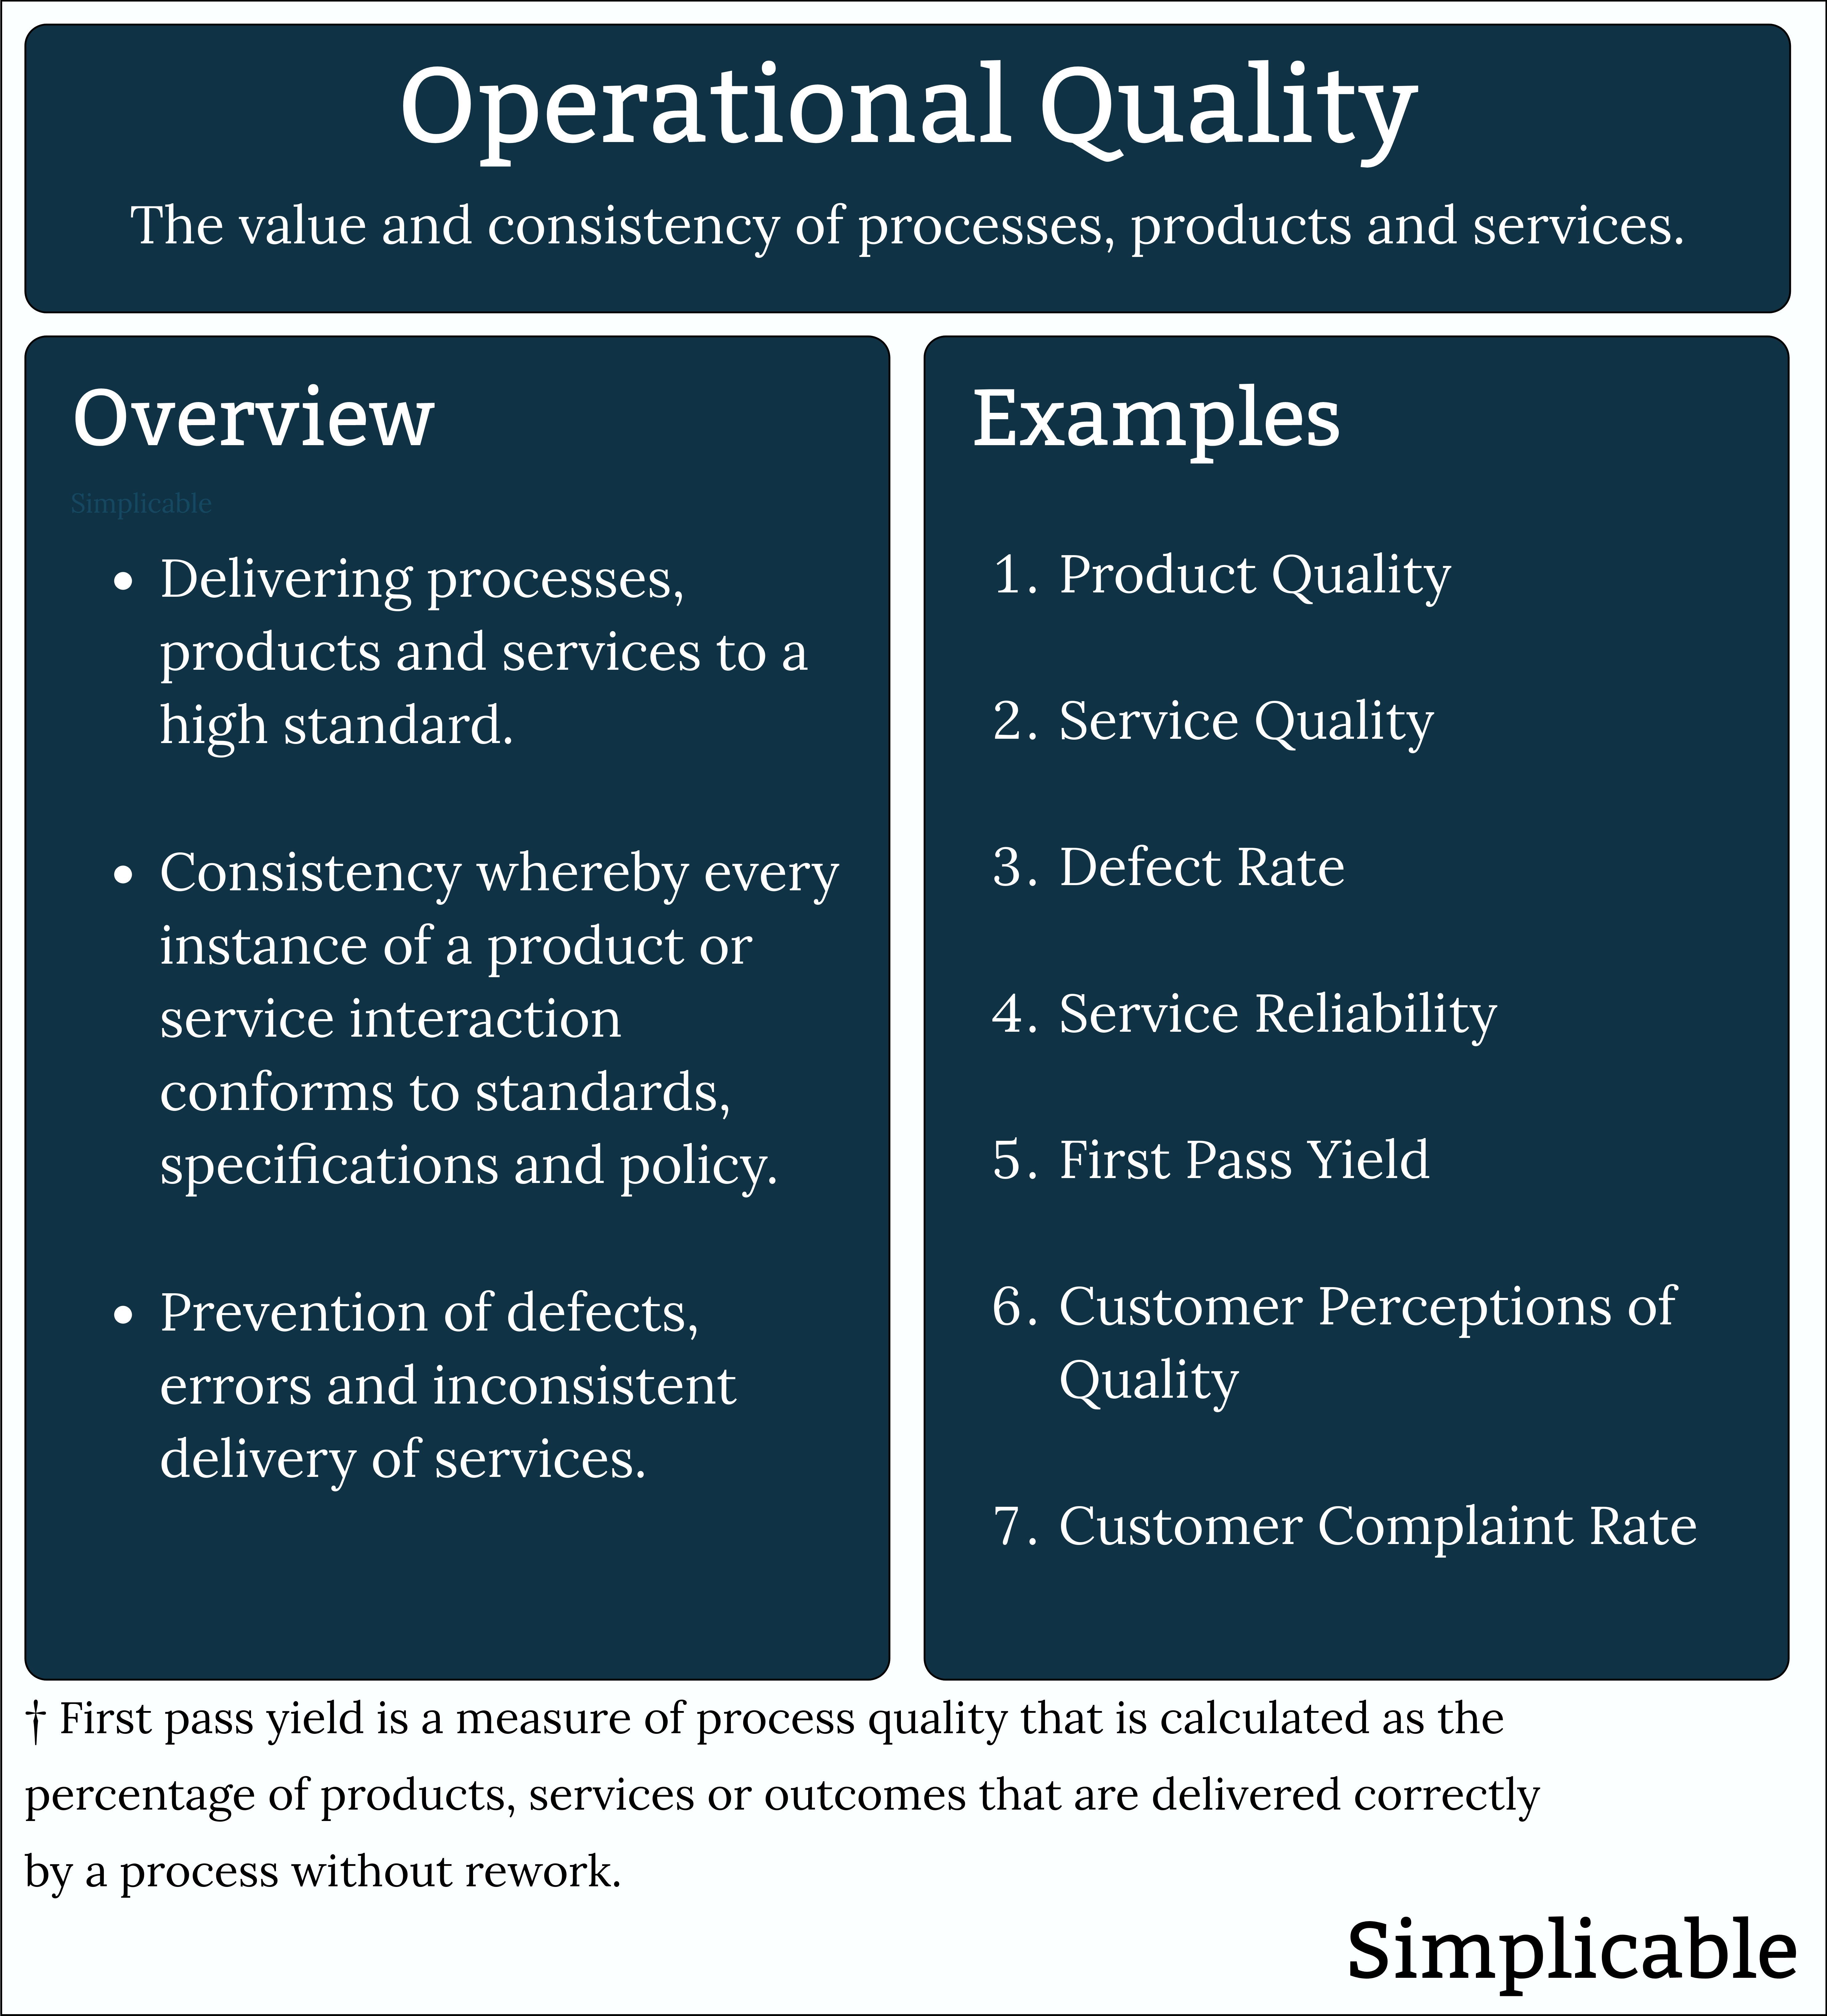 operational quality summary and examples